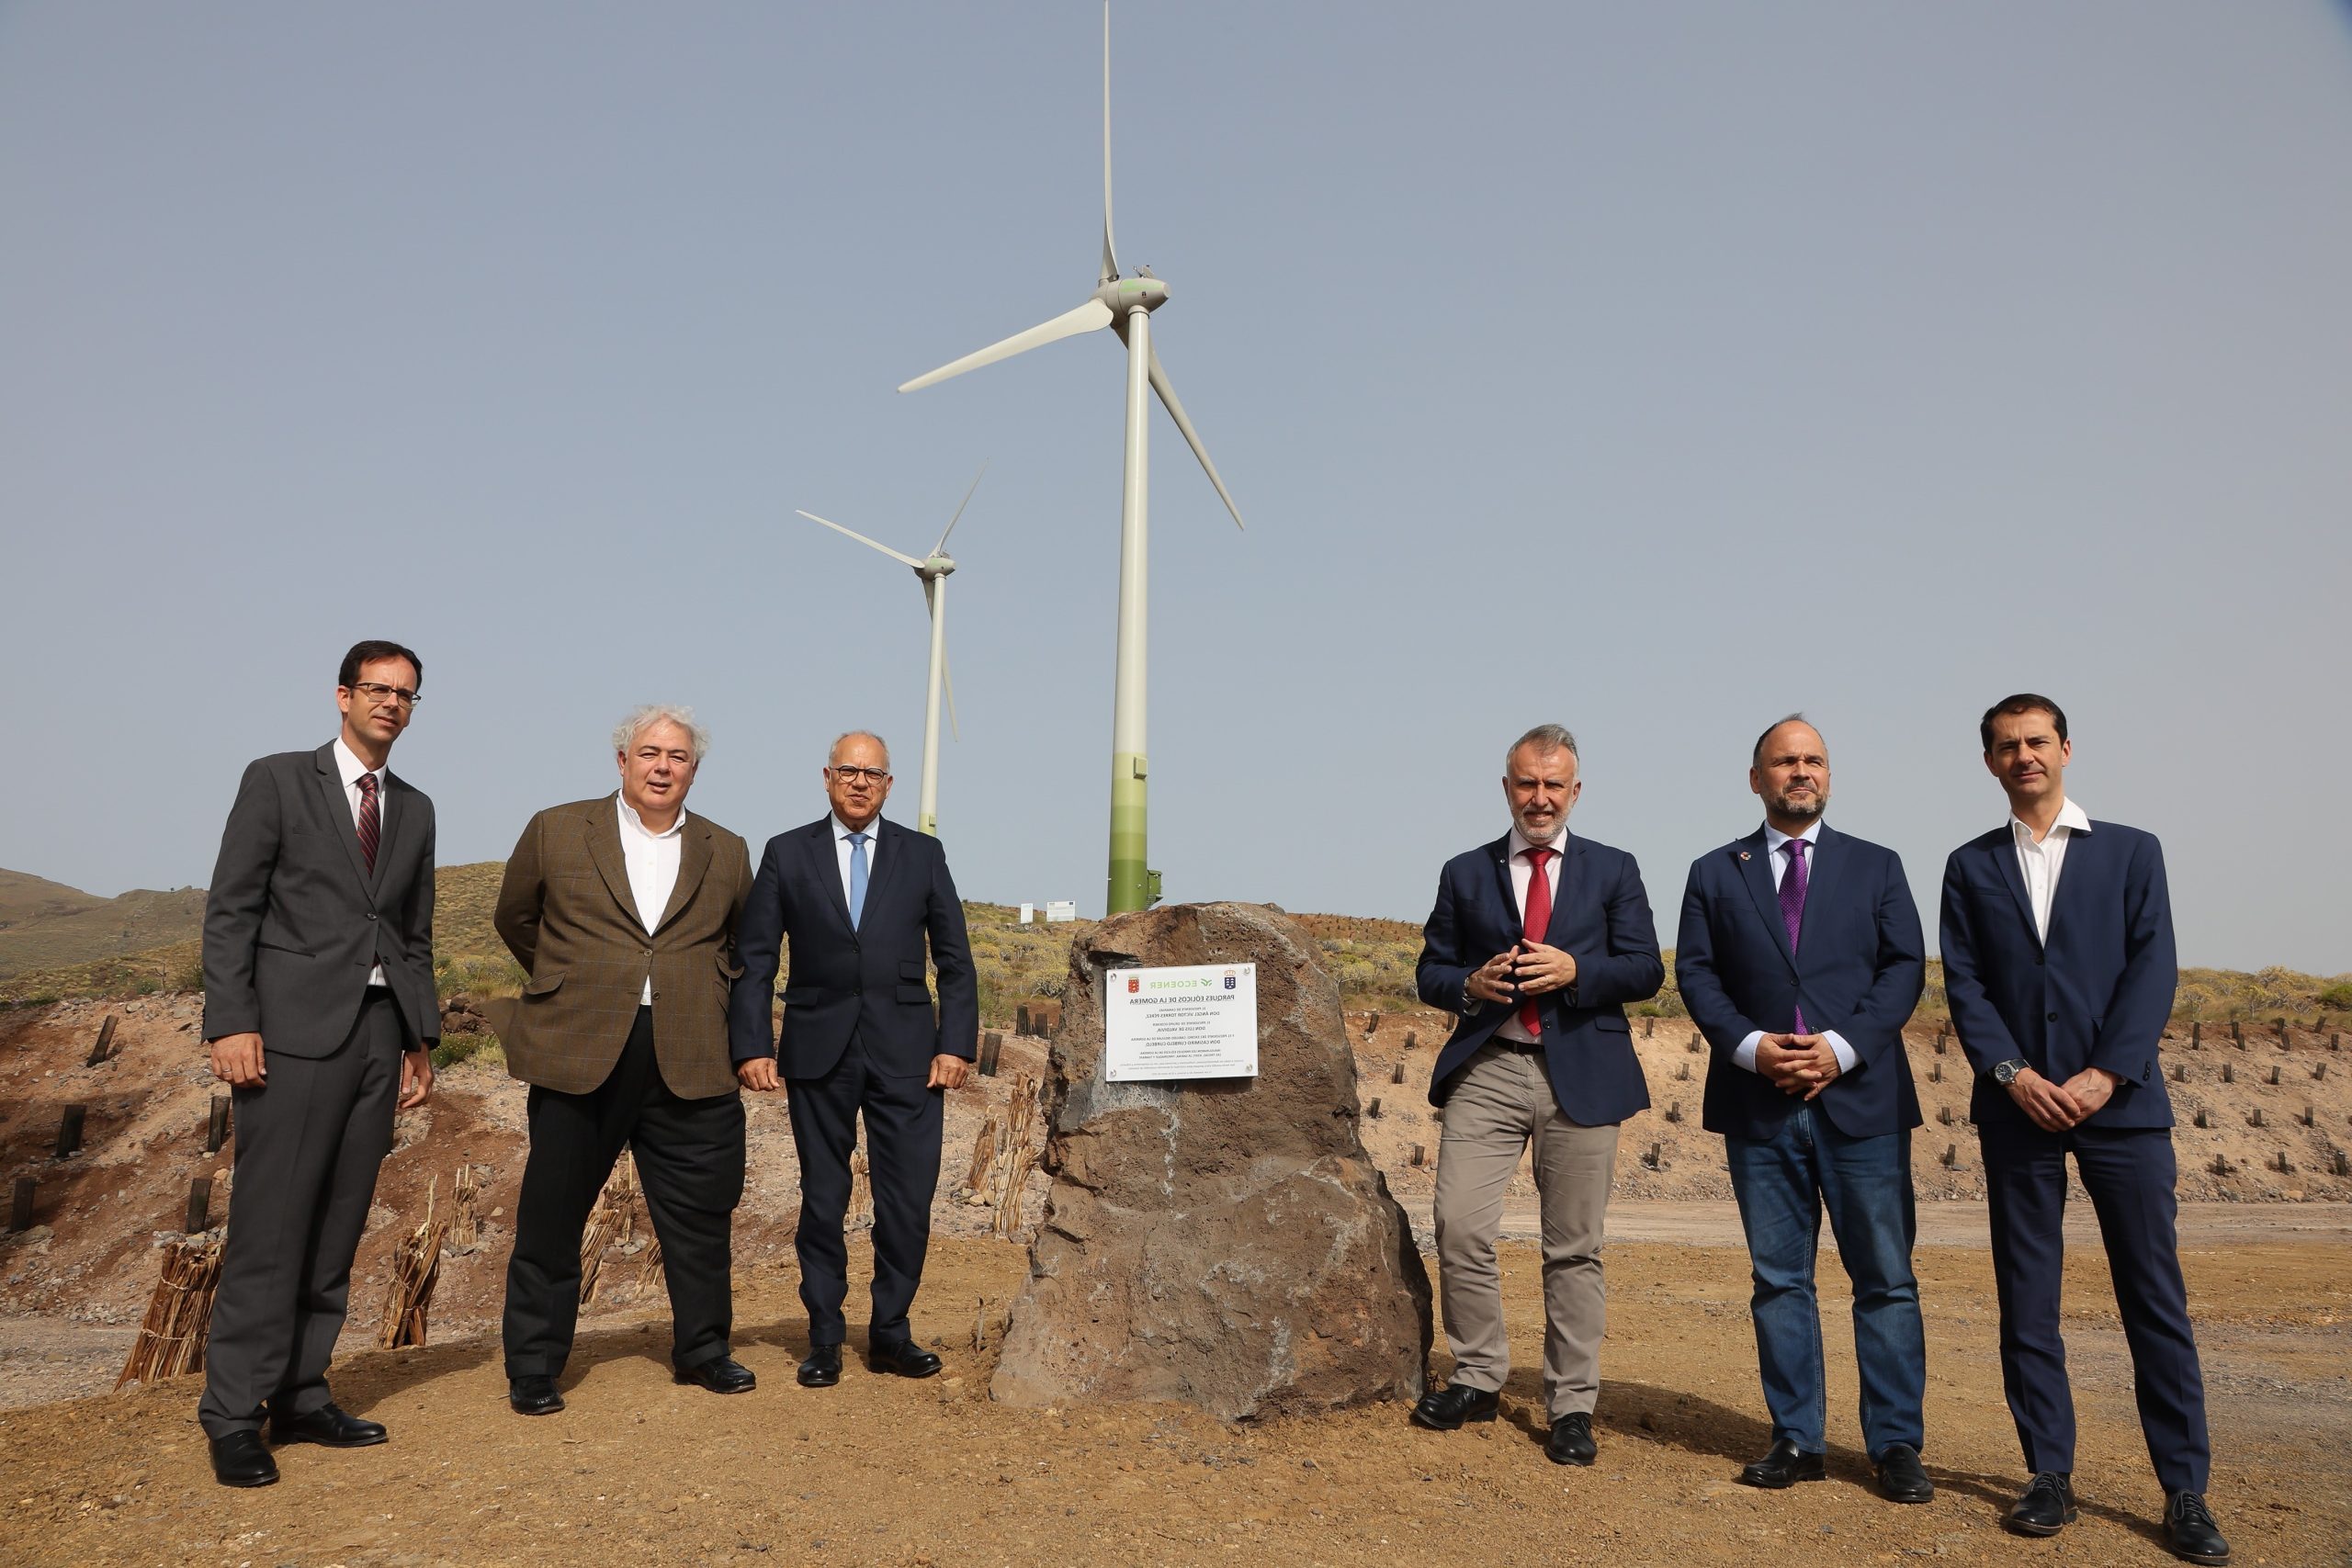 Ecoener inaugurates five new wind farms in La Gomera and secures position as renewable energy leader in the Canary Islands